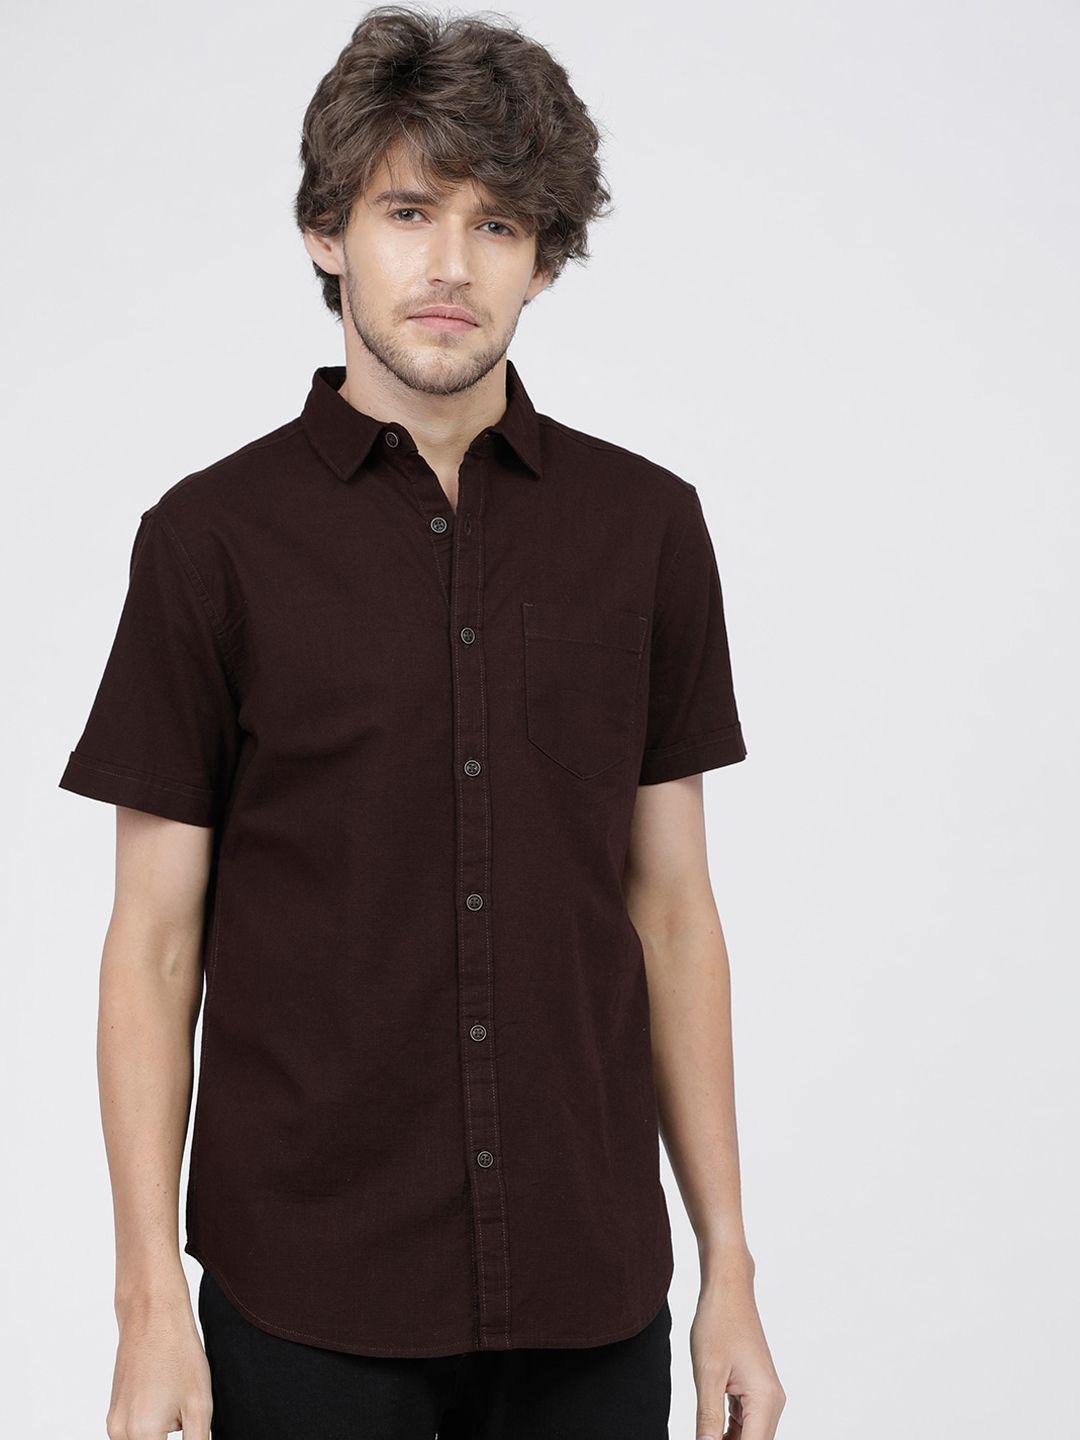 ketch-men-brown-solid-slim-fit-opaque-casual-shirt